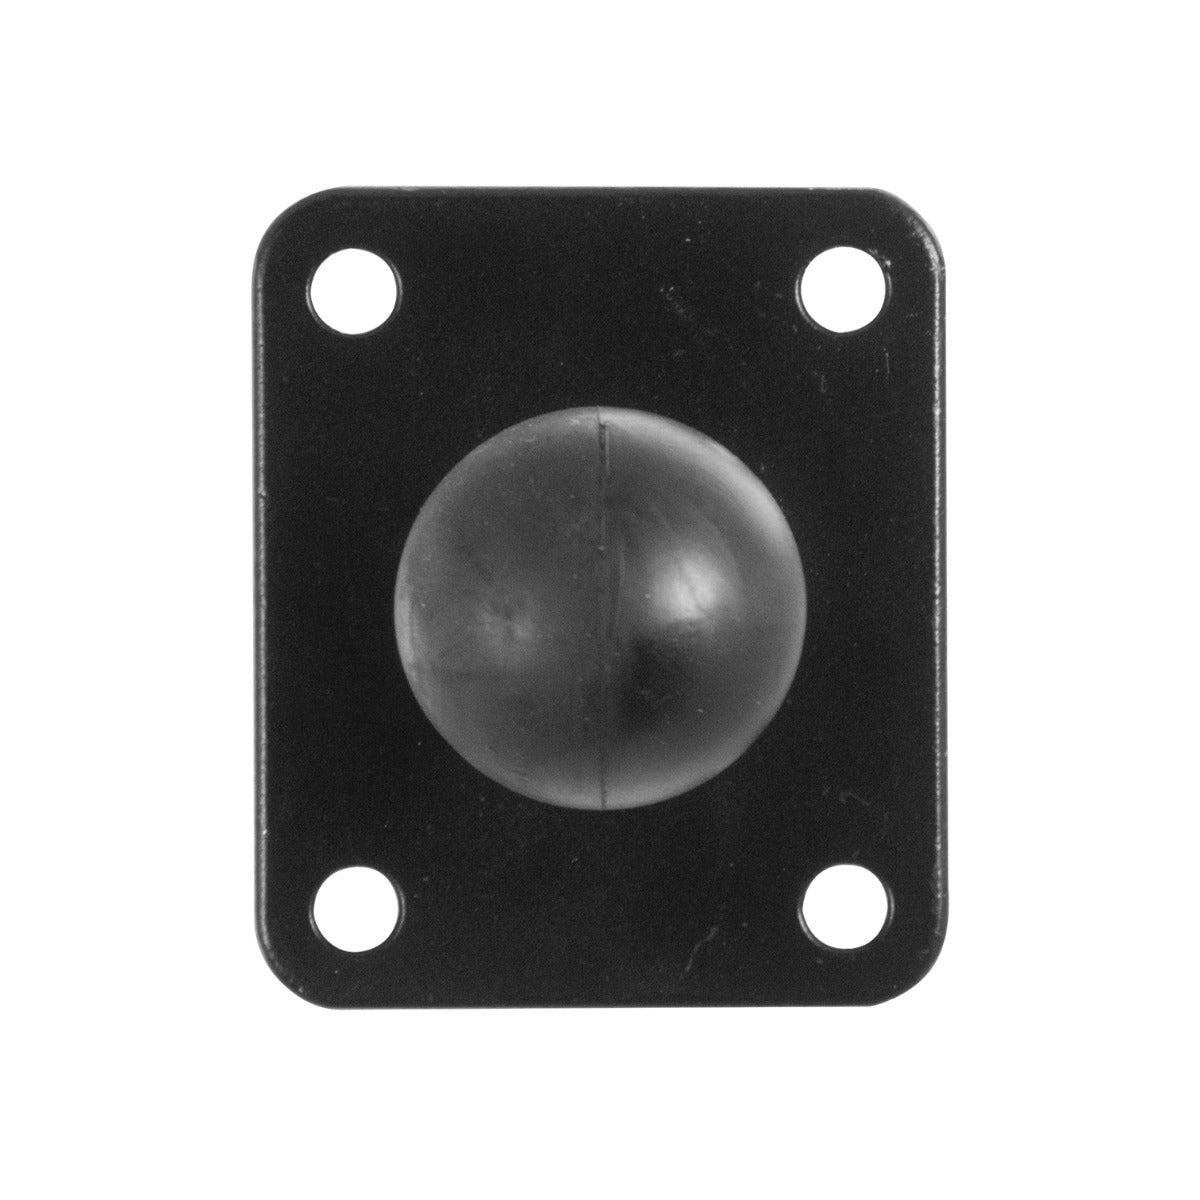 iBOLT 25mm / 1 inch Metal AMPS Adapter Plate